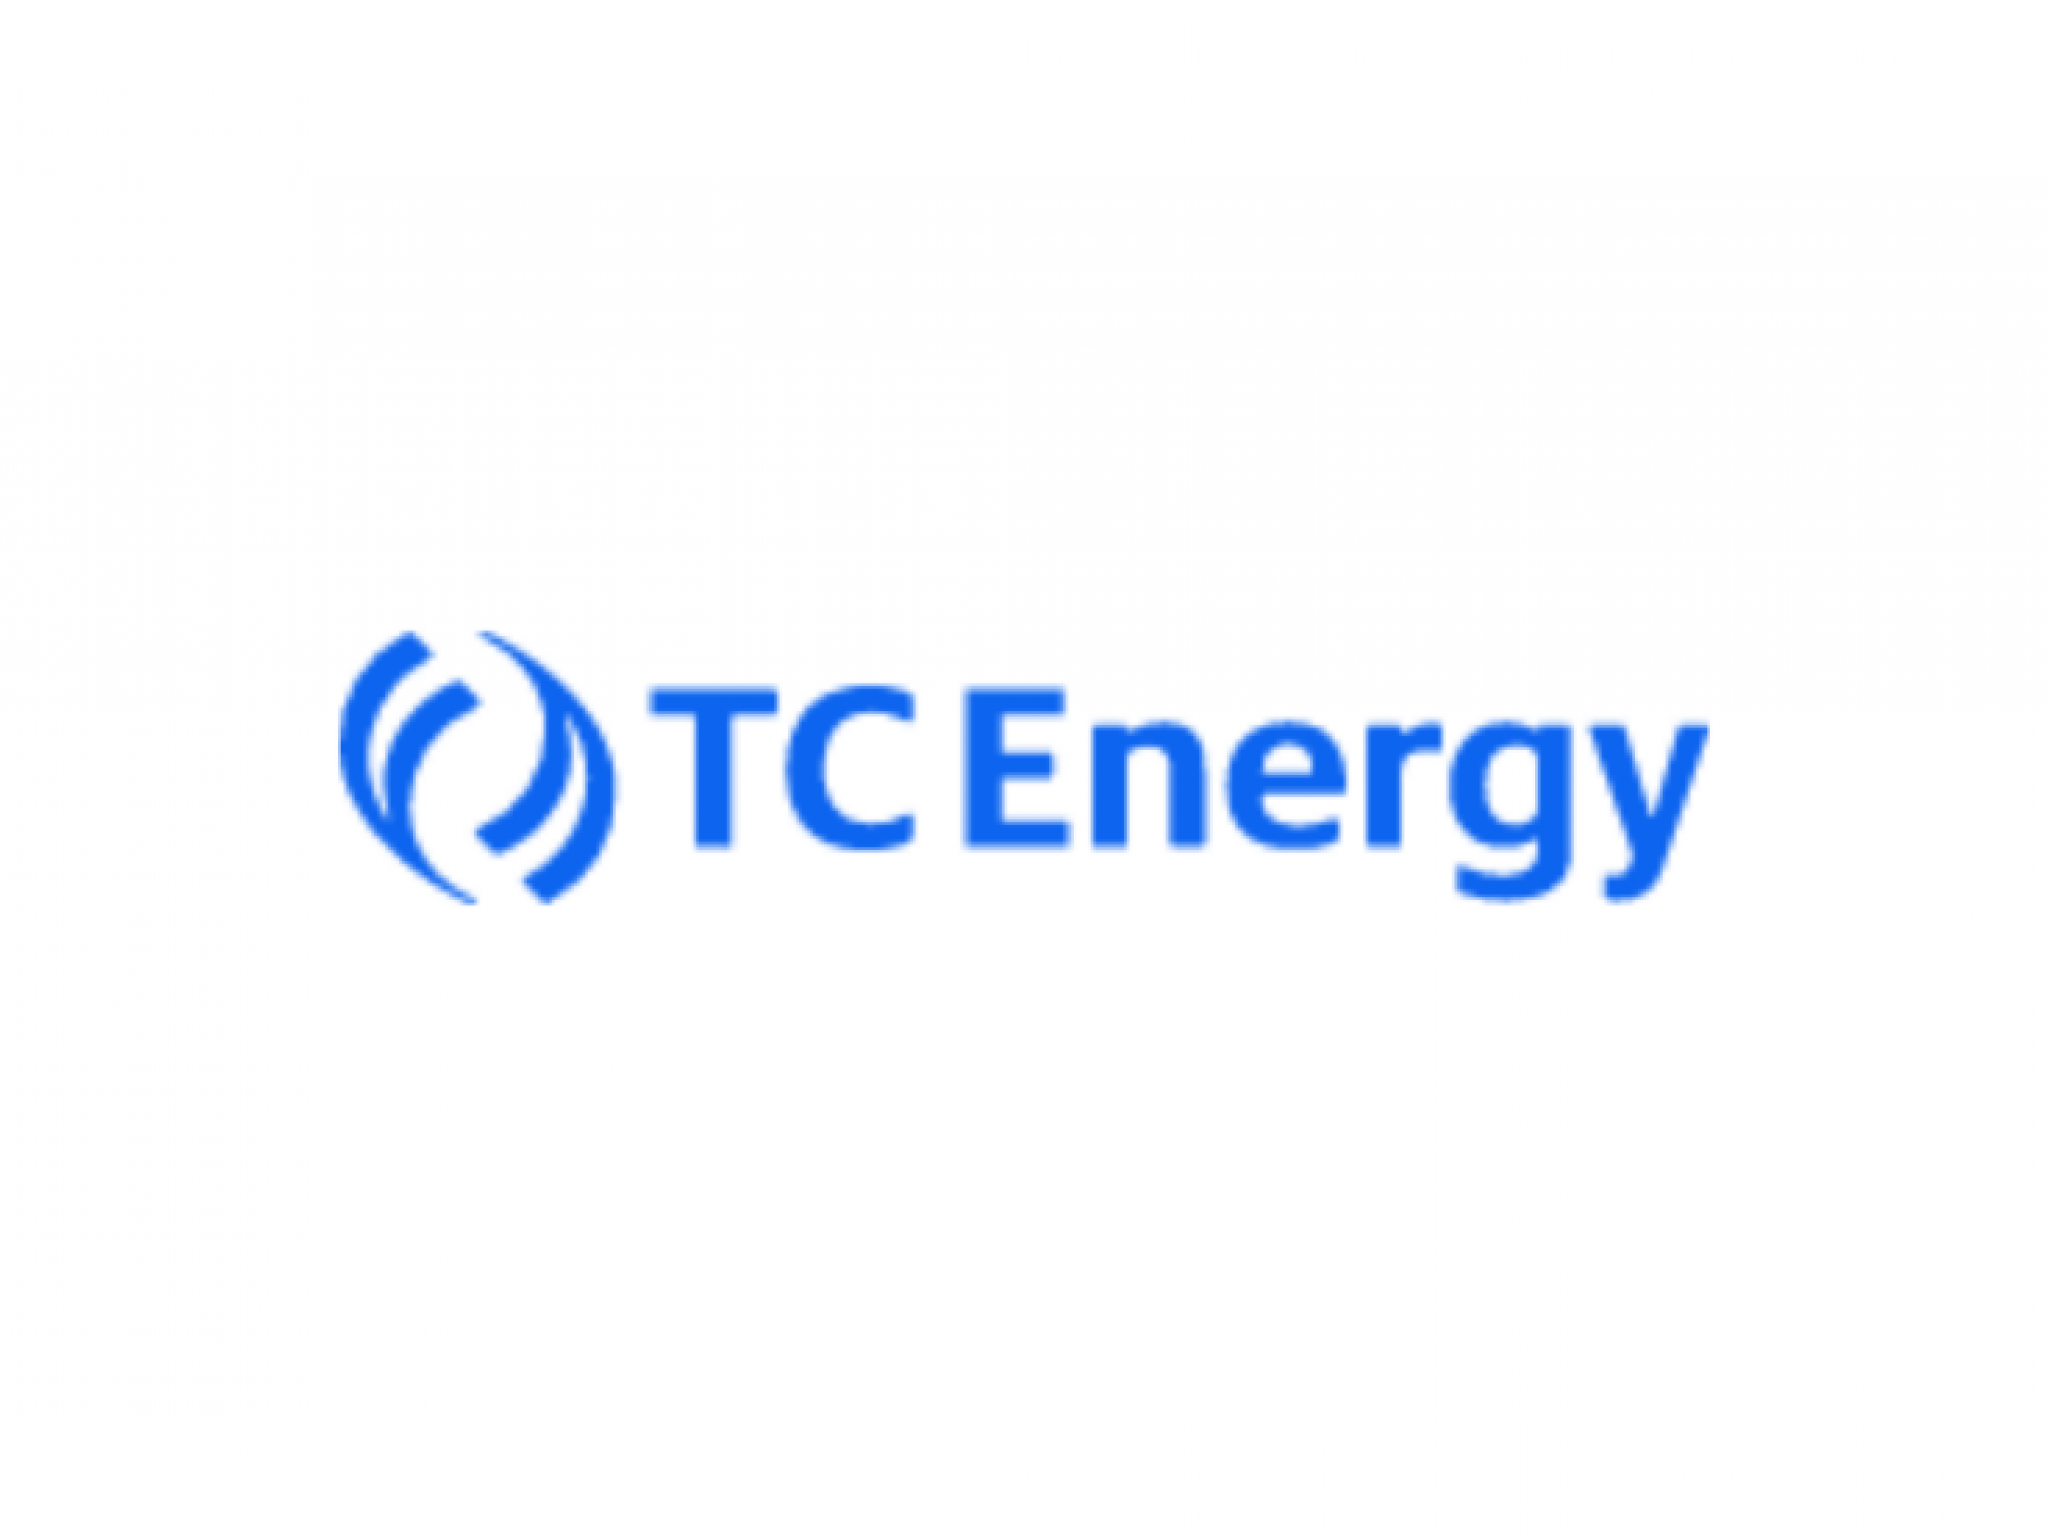  tc-energy-on-the-move-asset-sale-paves-way-for-debt-reduction 